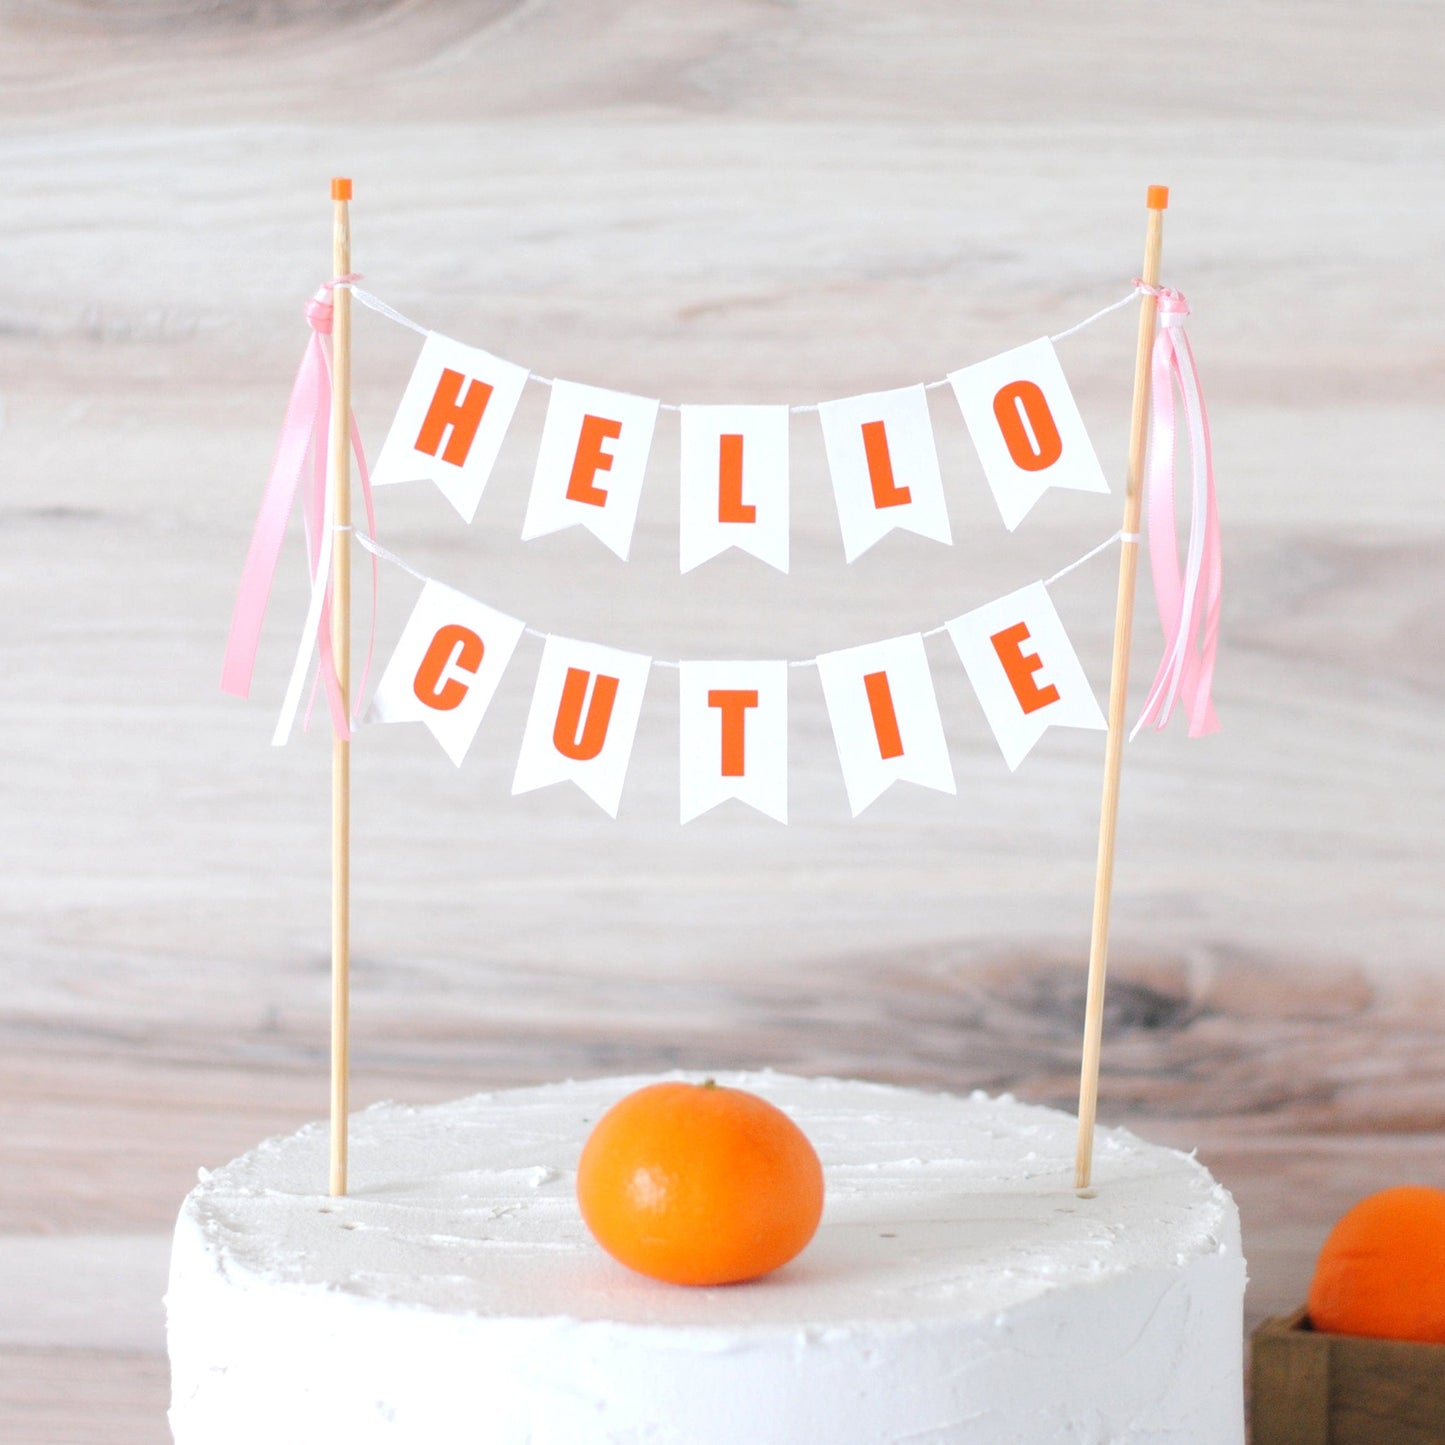 
                  
                    Hello Cutie baby shower cake topper for baby girl with pink  ribbons
                  
                